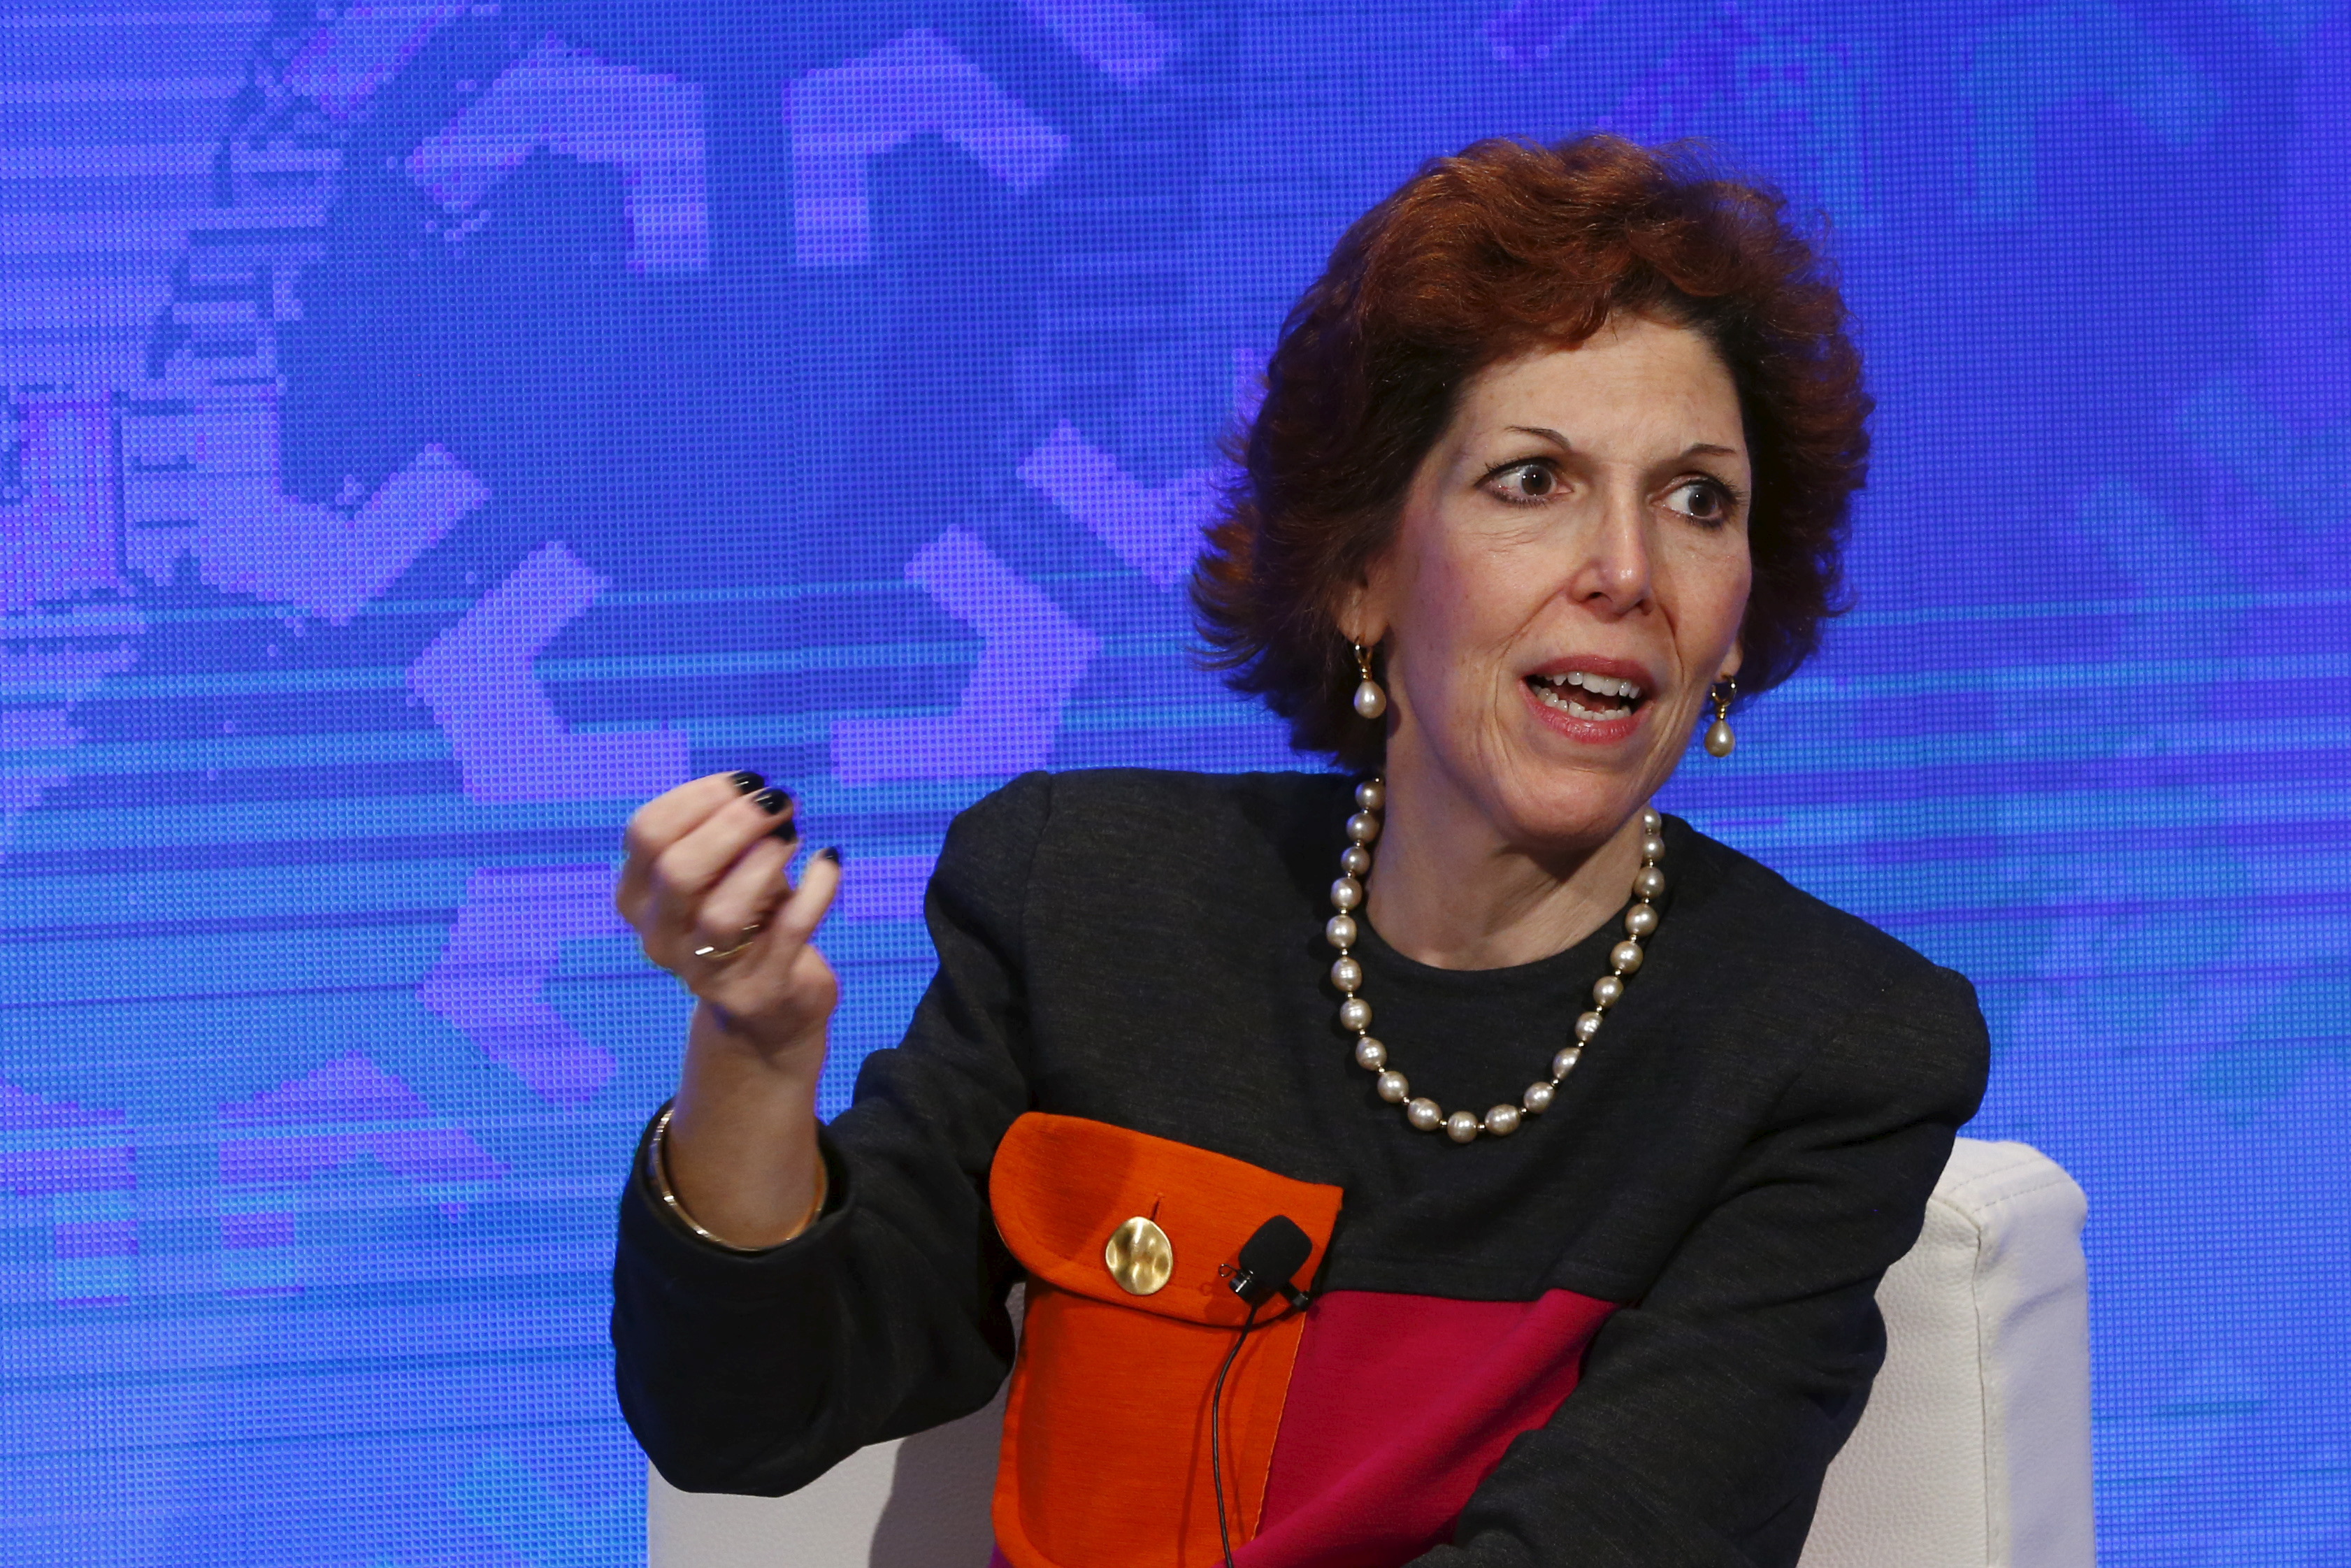 Cleveland Fed President Loretta Mester takes part in a panel convened to speak about the health of the U.S. economy in New York